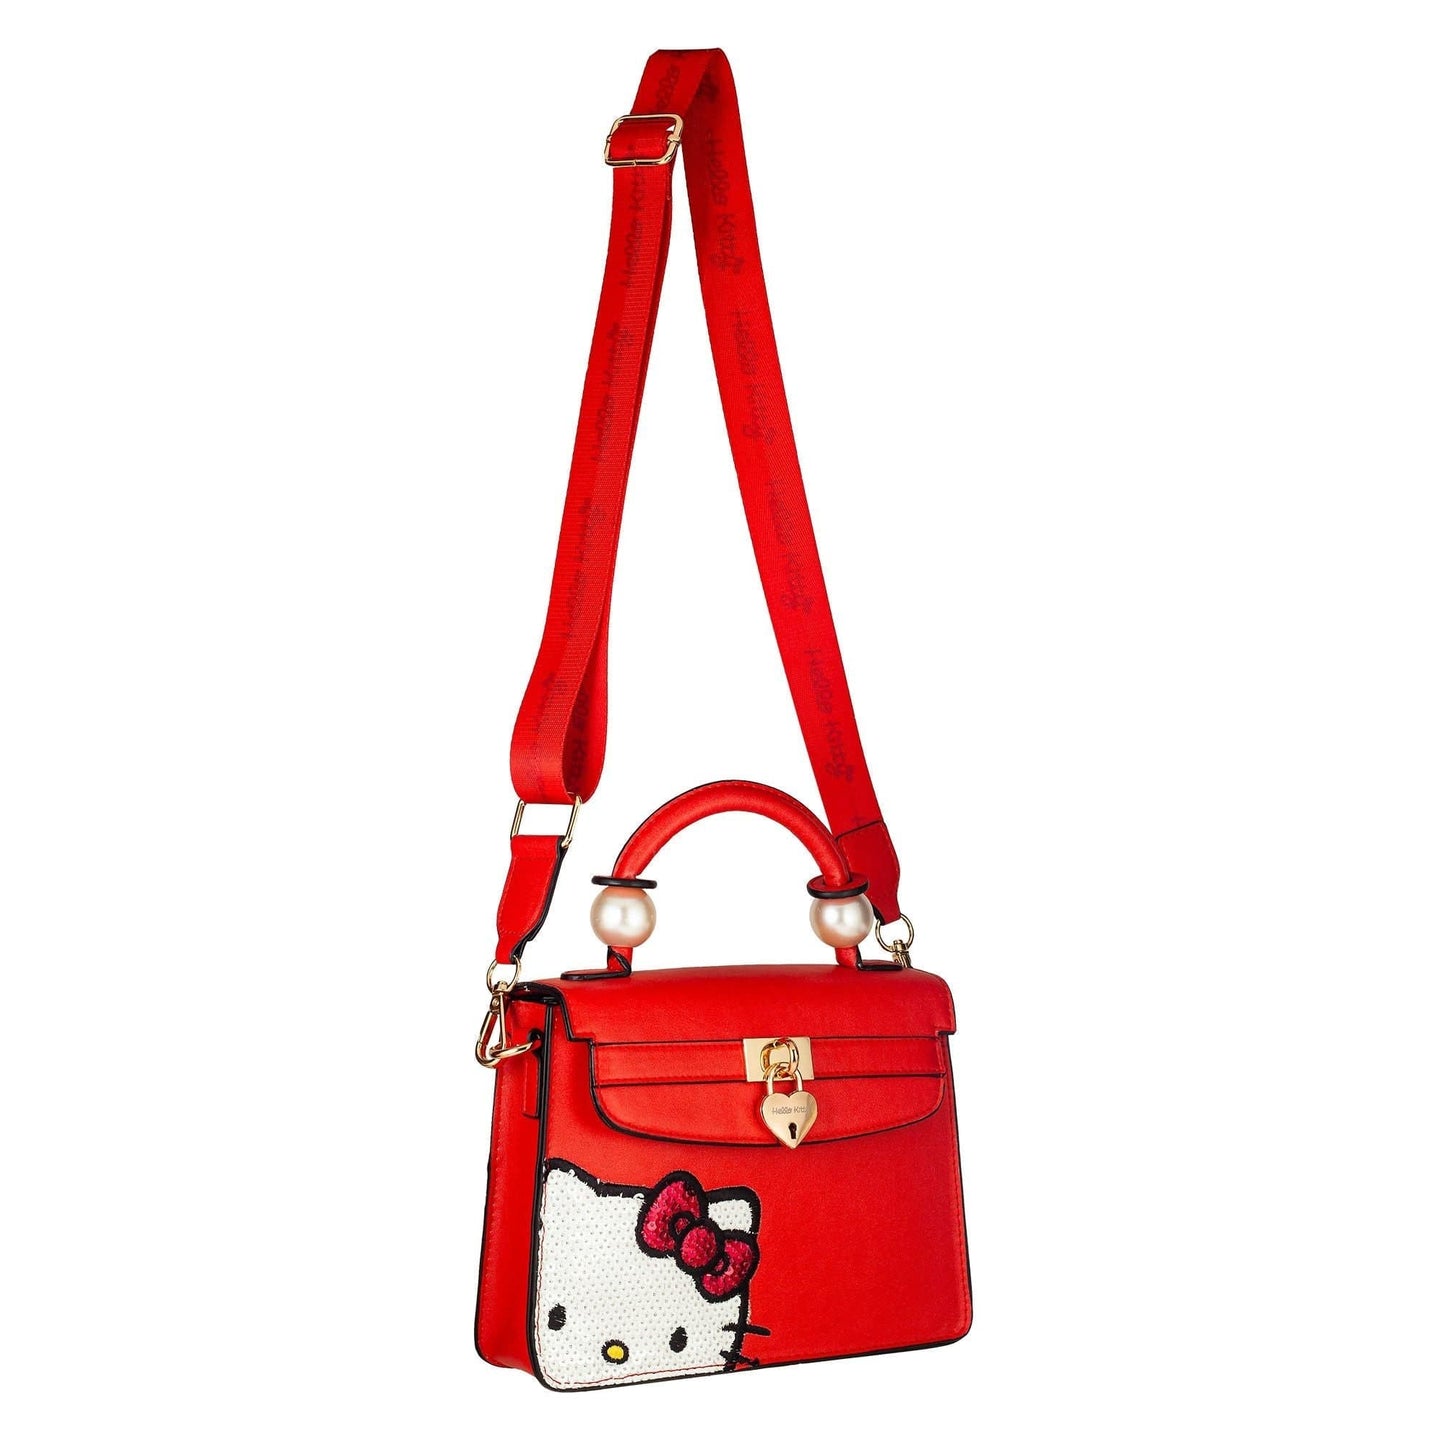 Collective Hobbees Gift Hello Kitty Satchel Gift Set CHB22SHKS